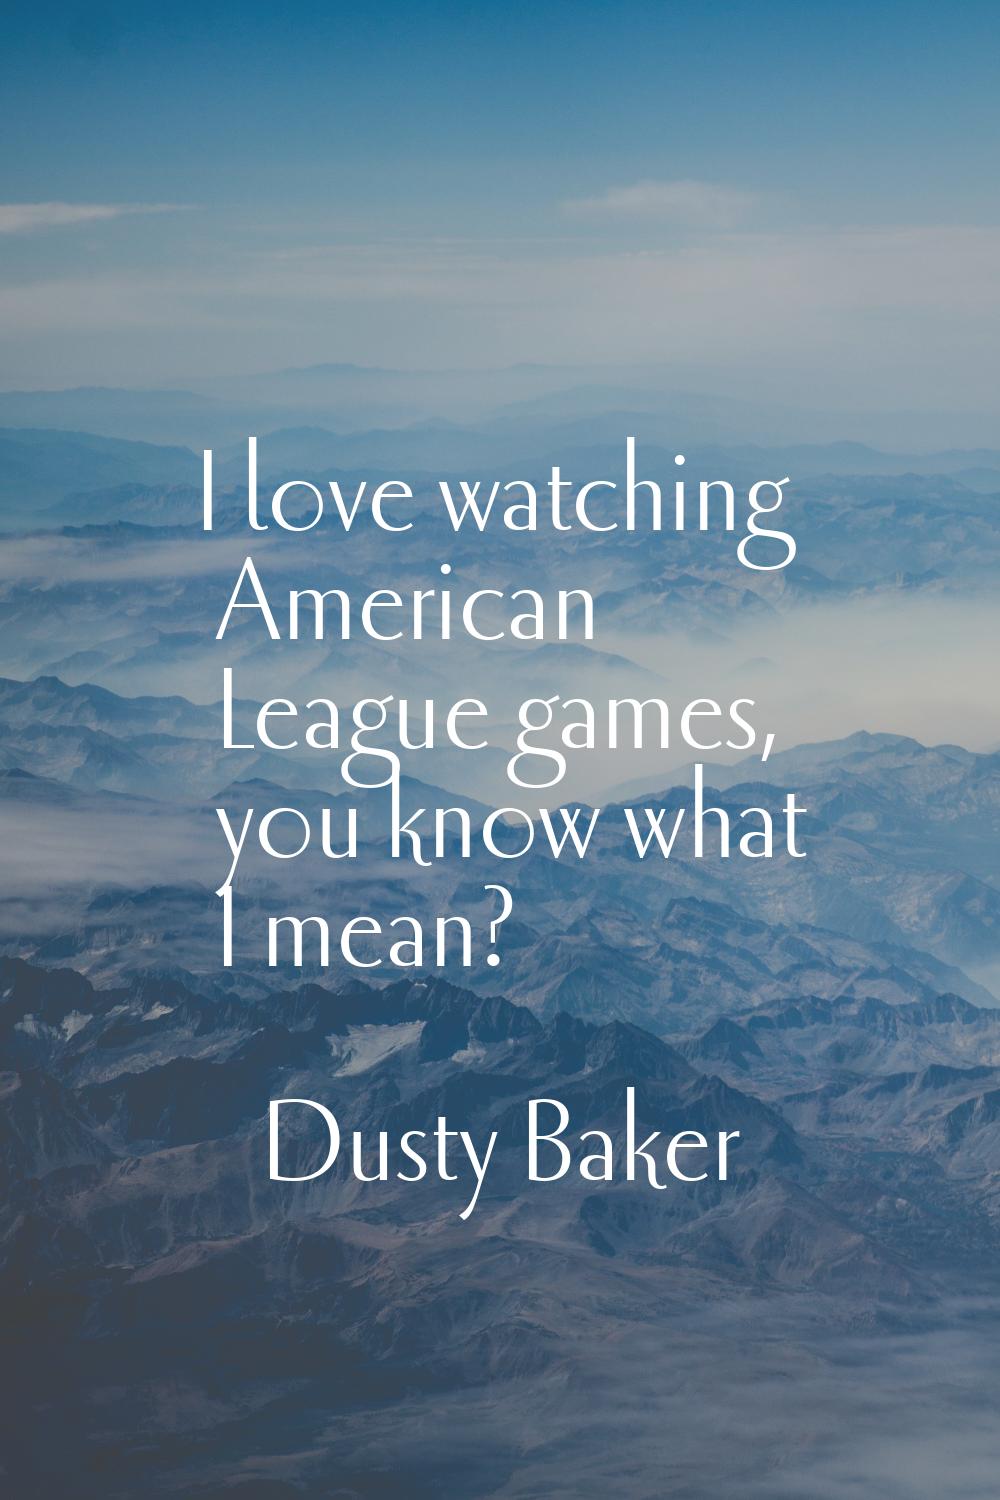 I love watching American League games, you know what I mean?